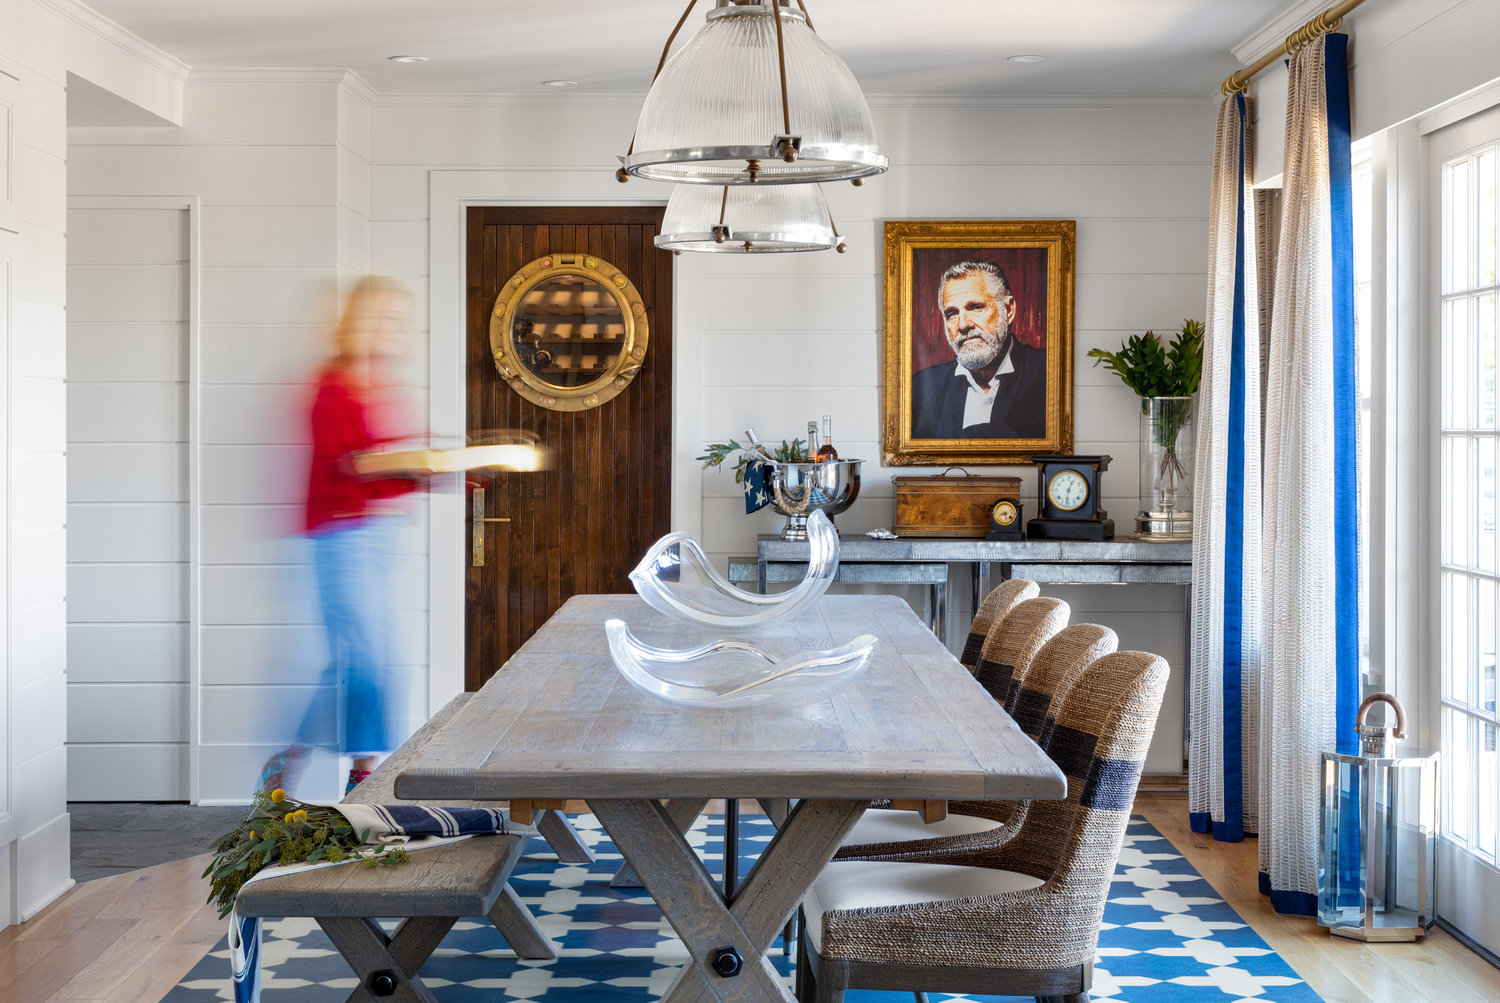 An antique ship lantern hangs above the custom wide plank dining table and bench ready to serve up to 16; an easy-care vinyl floorcloth adds fuss-free flair. The porthole door hides a walk-in wine cellar and veggie storage unit.